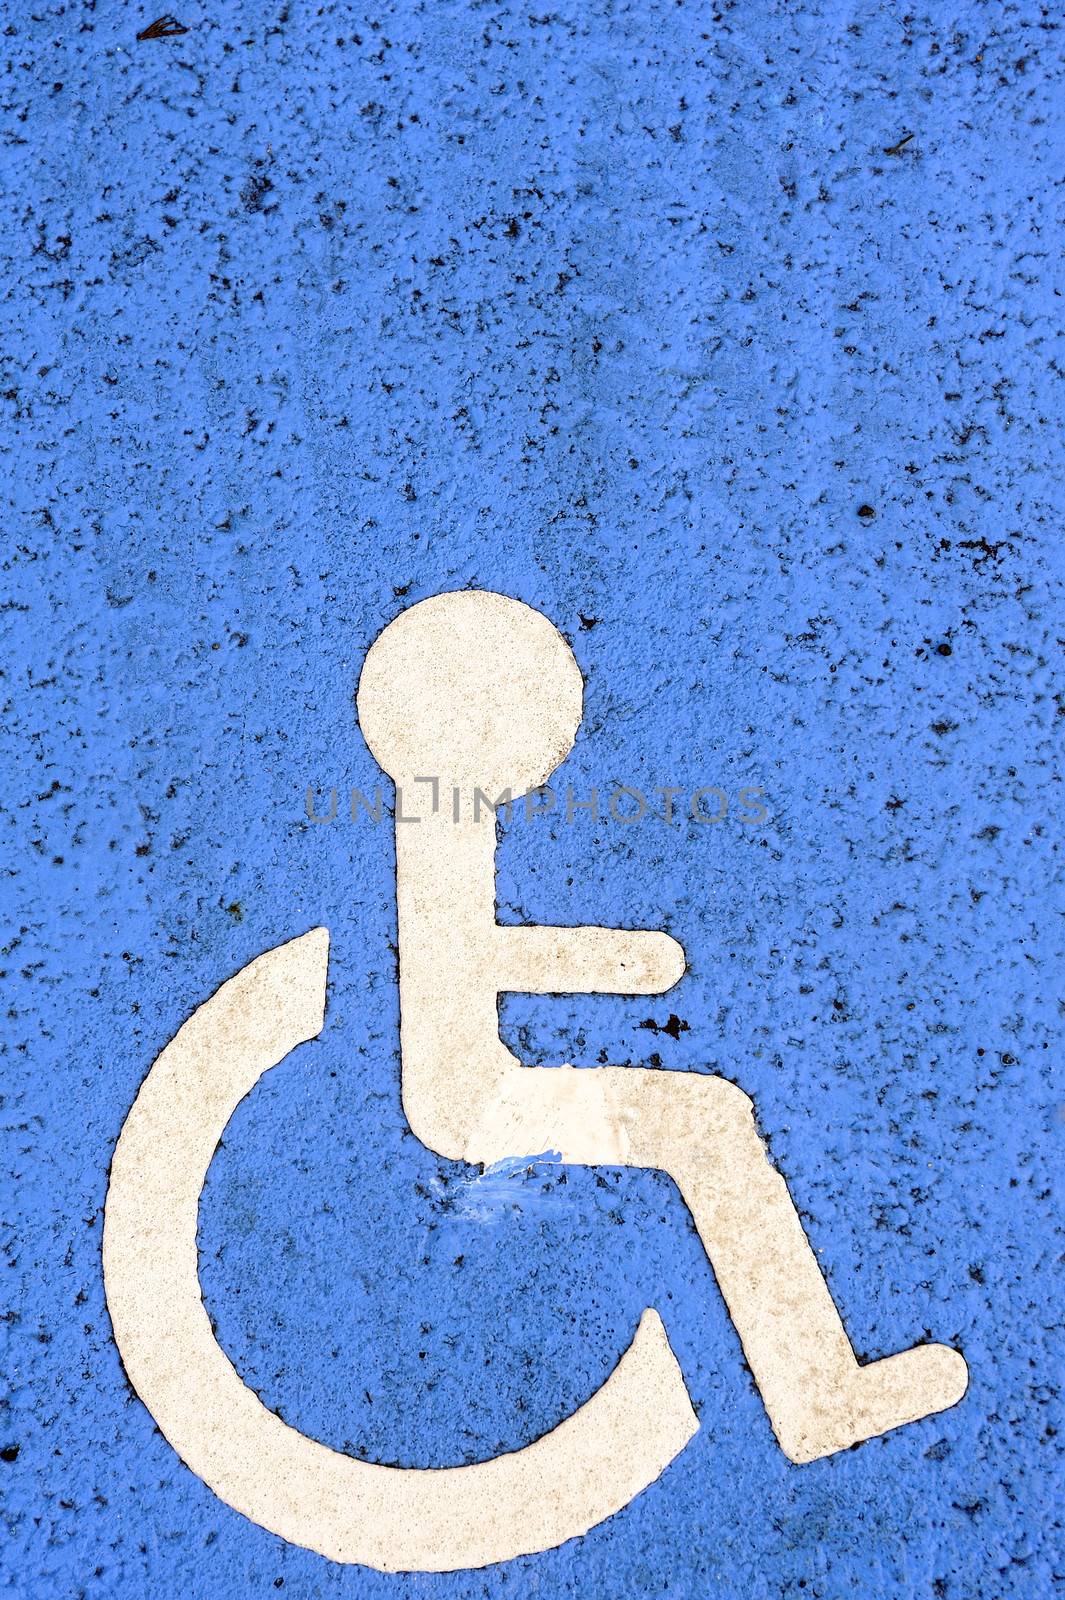 Parking space reserved for handicapped by gillespaire